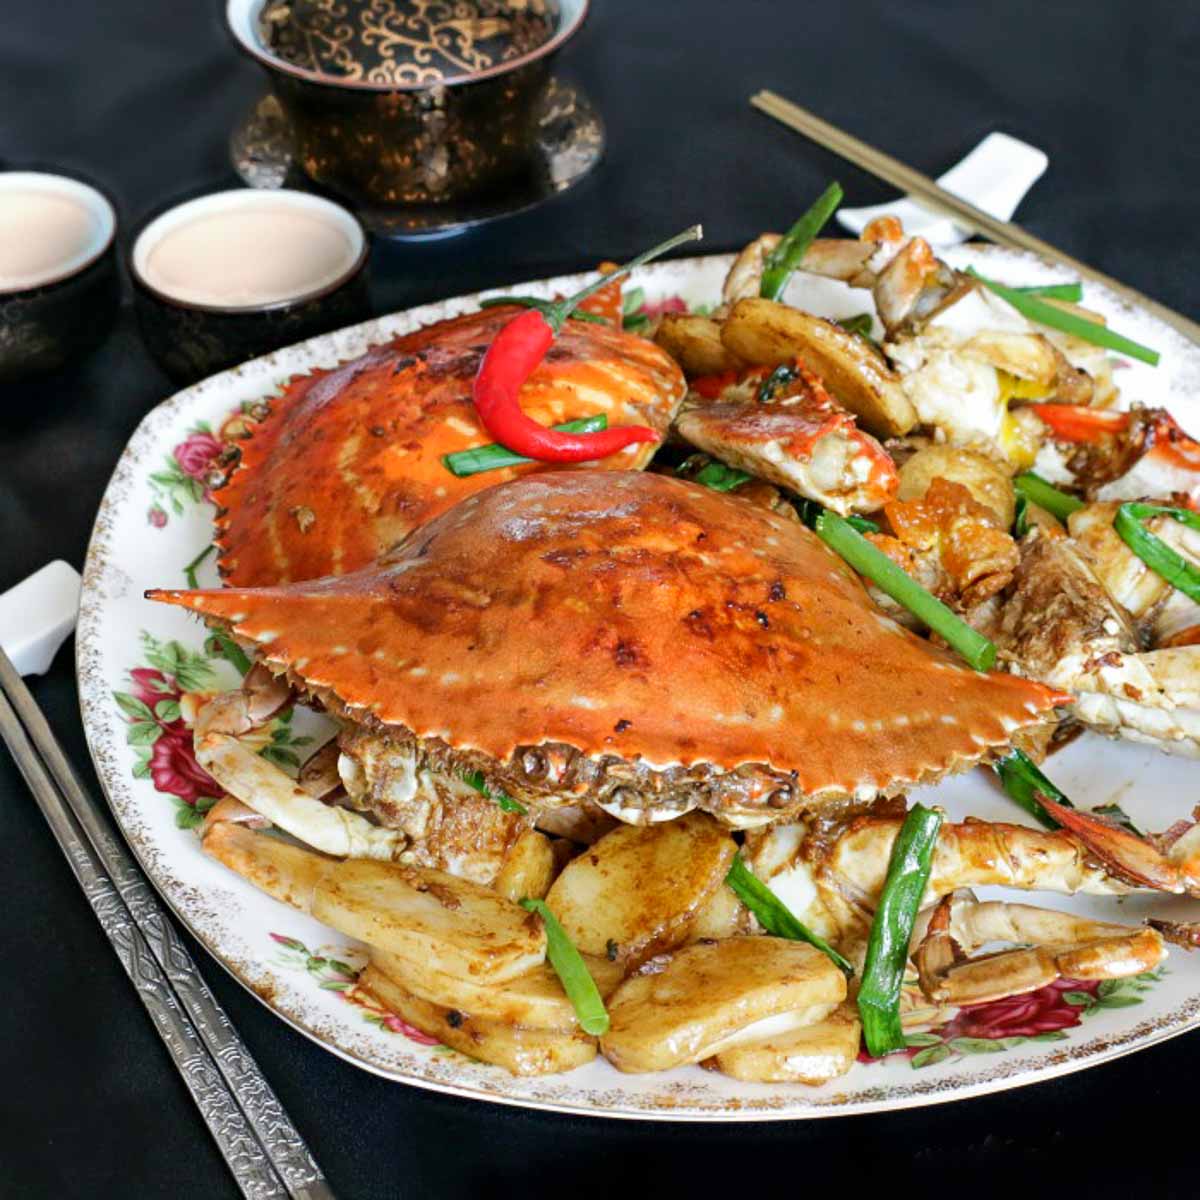 Stir fried crab with Chinese new year cakes on a white plate for Spring festival.